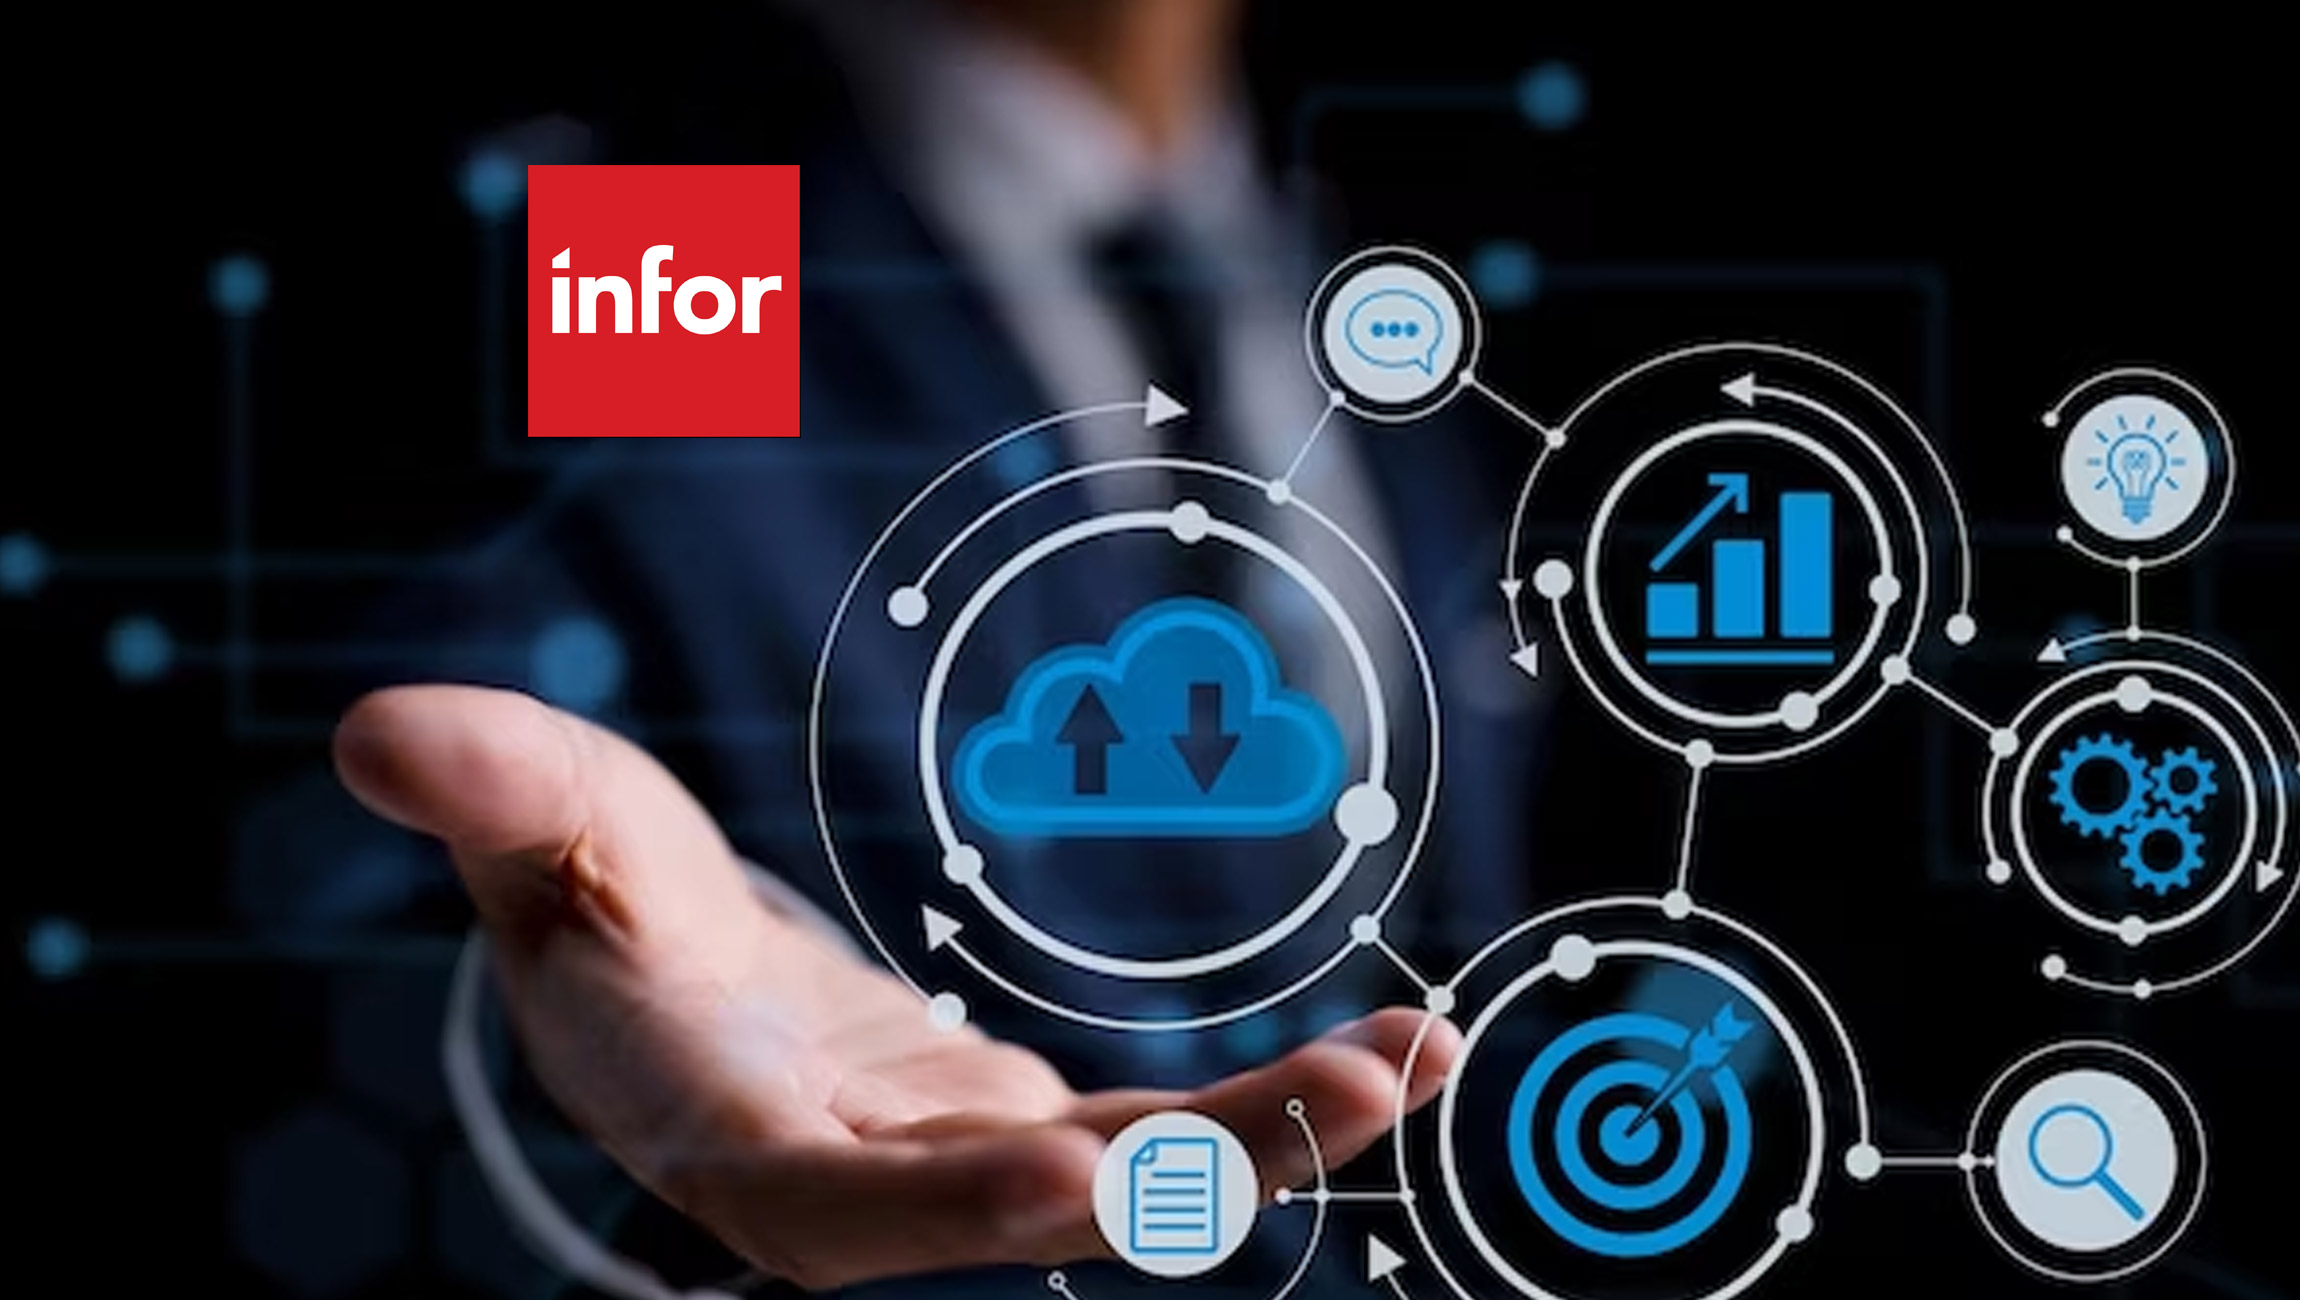 Infor-Introduces-Enterprise-Automation-Solution_-a-Set-of-Infor-OS-Cloud-Services_-Built-on-AWS_-Designed-to-Help-Companies-Rapidly-Scale-Automation-and-Achieve-Business-Results-Faster-2